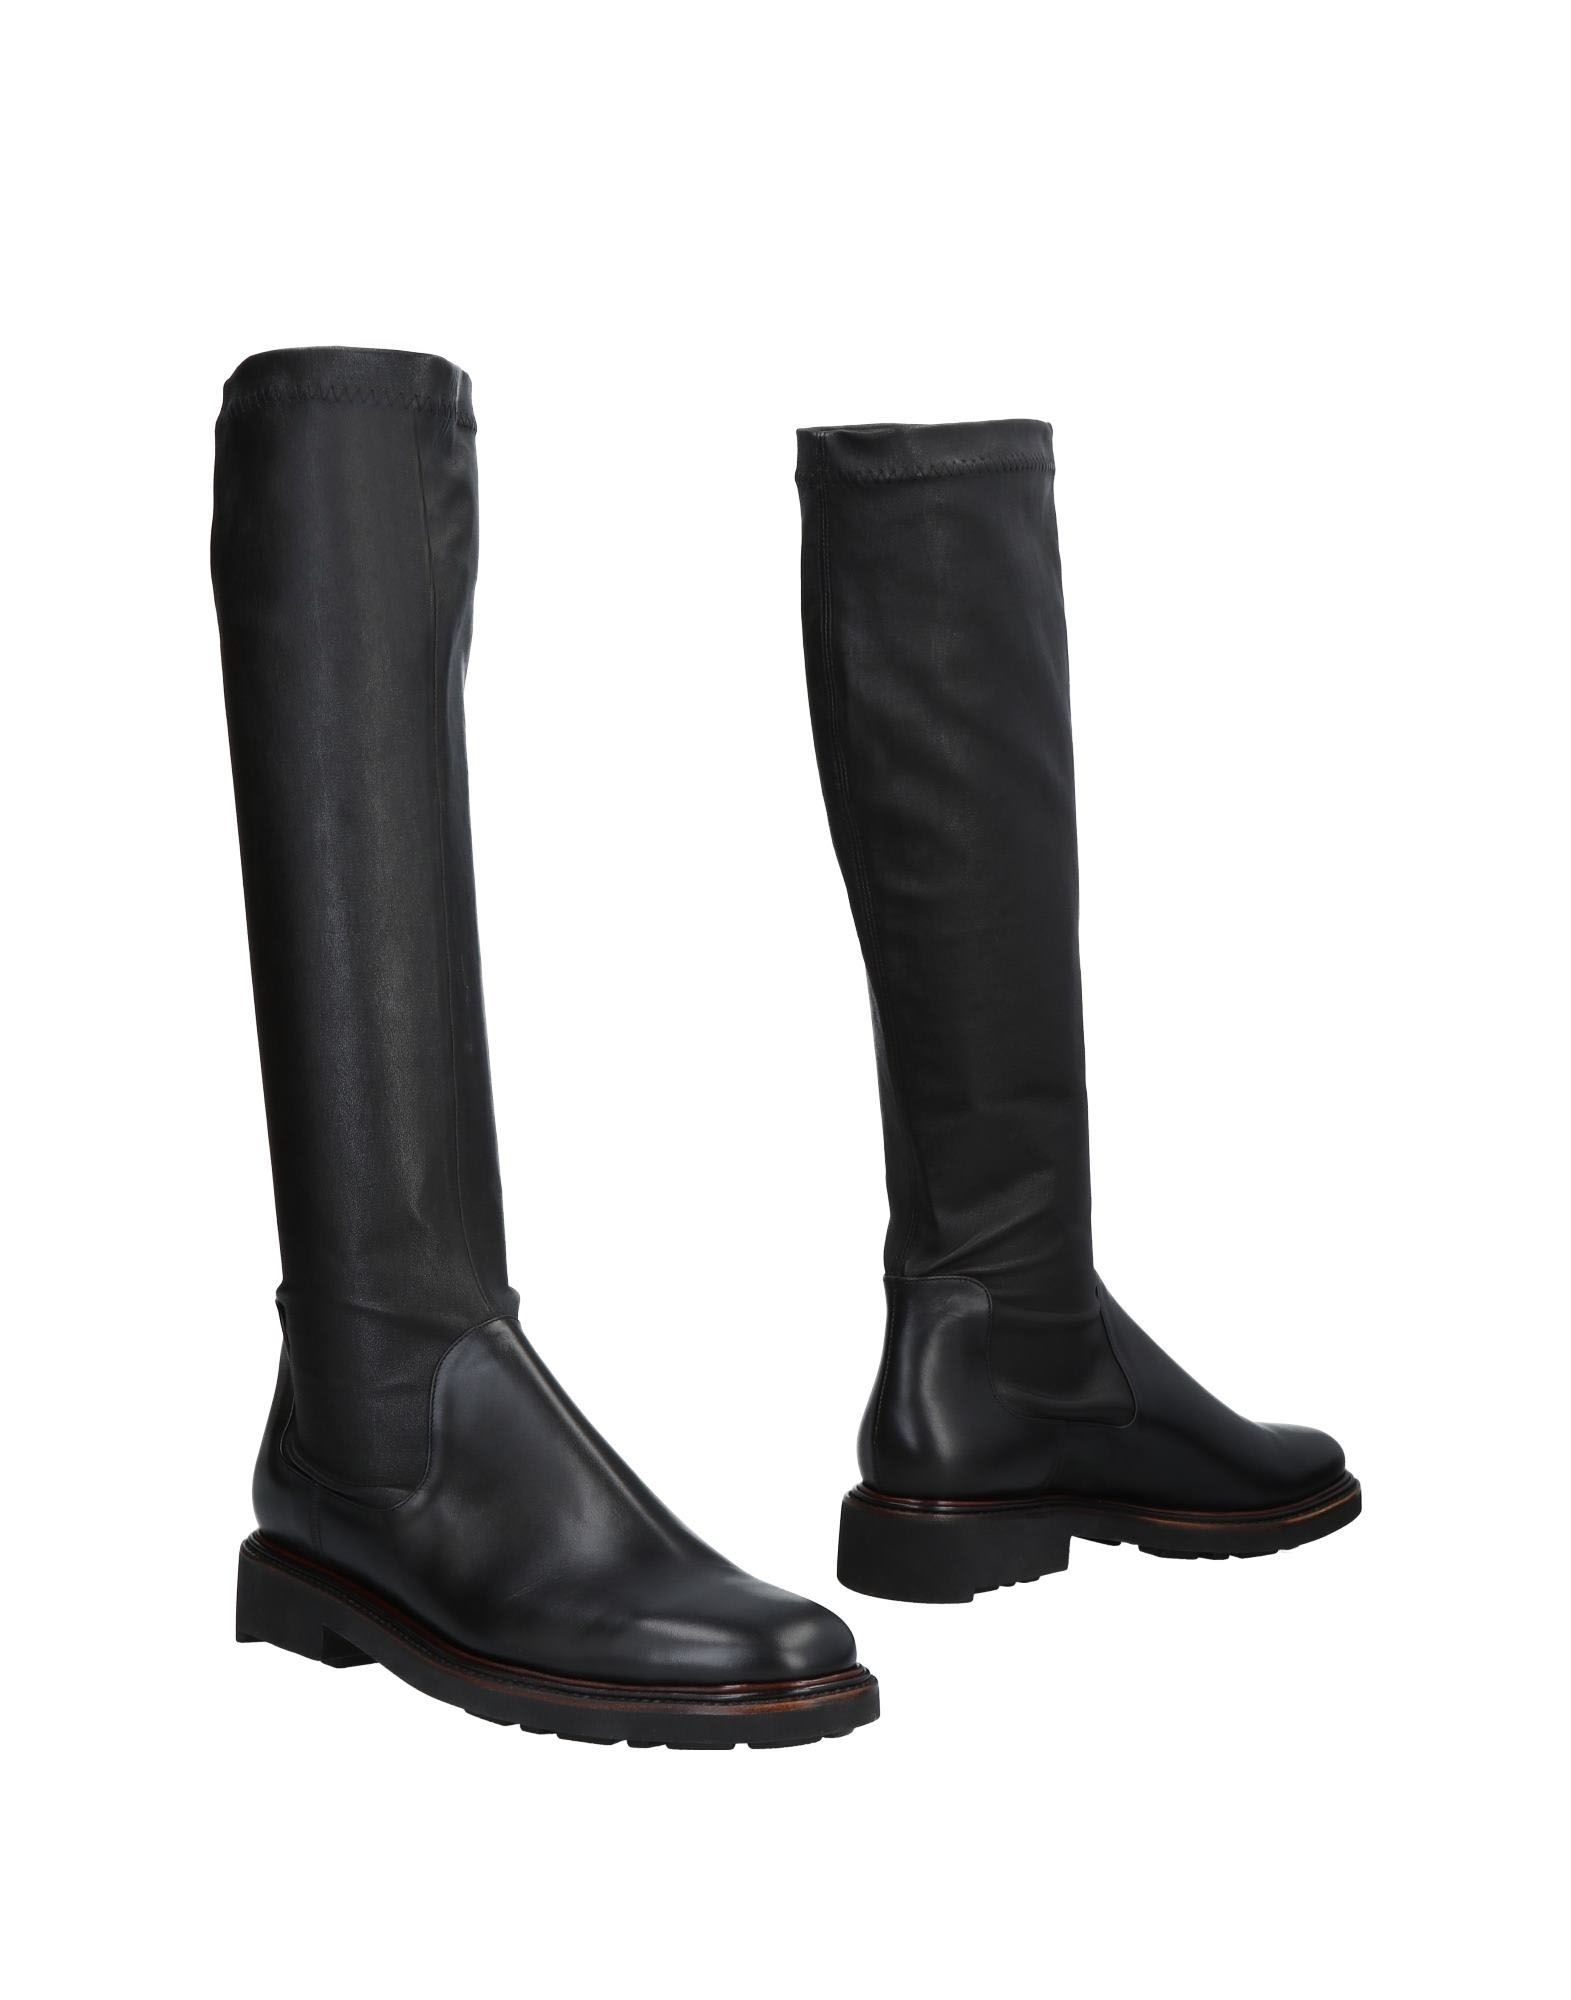 dressing gownRT CLERGERIE Boots,11489464RE 13